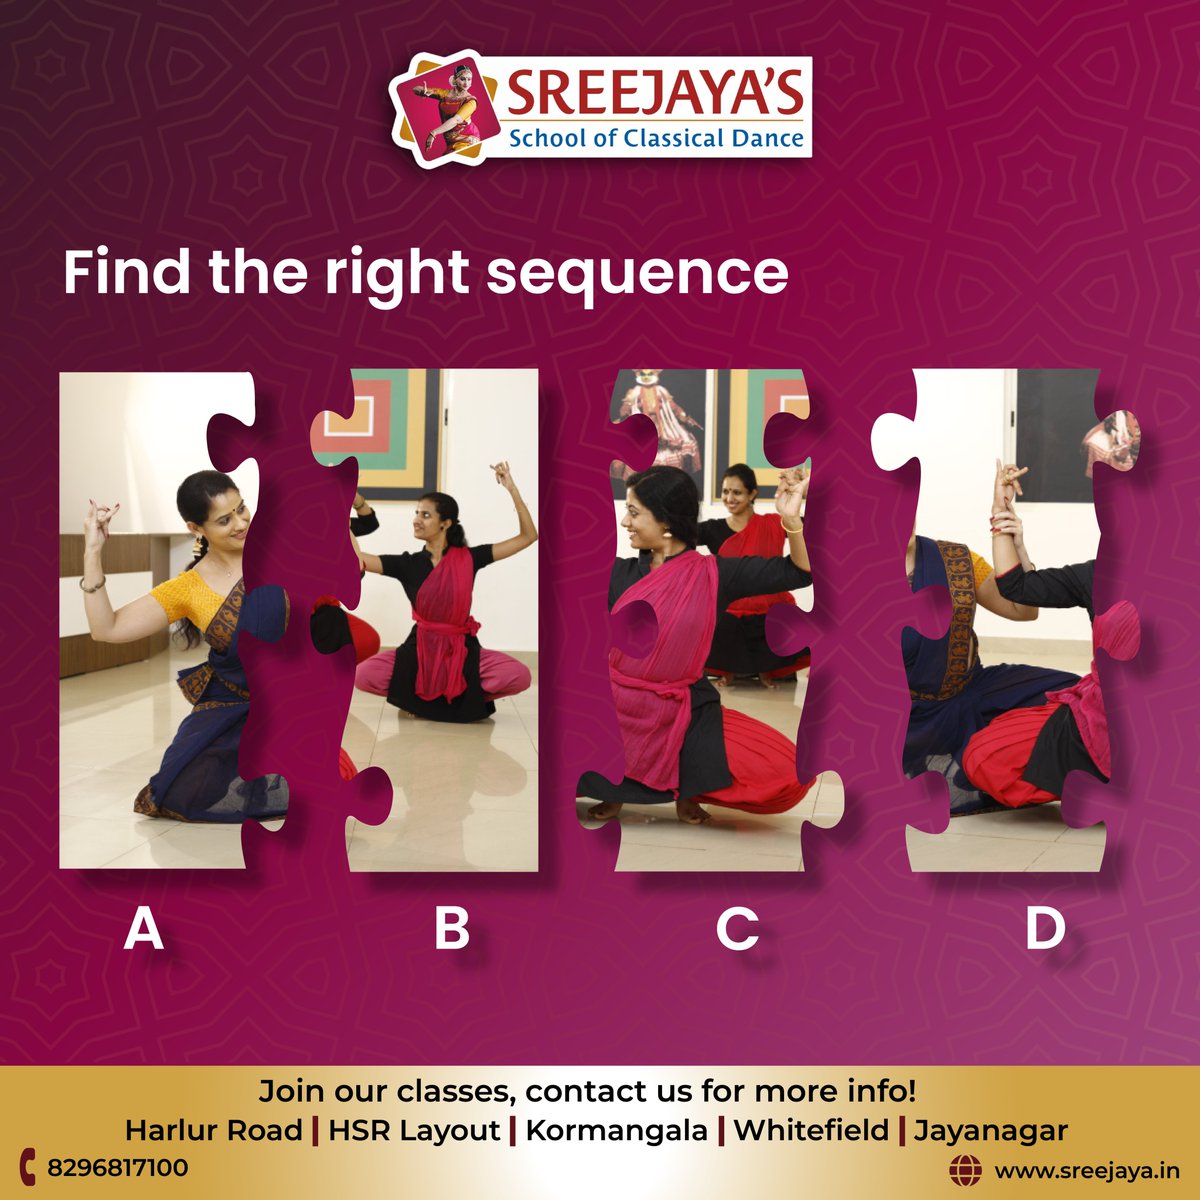 Find the Right Sequence.
Learn Professional #Bharatanatyam from Sreejaya's School of #ClassicalDance 
#Indianclassical #classicaldanceclasses #learnbharatnatyam #DanceSchool #bharatnatyampose #indianclassicaldance #bharatnatyamlove #QUIZTIME #puzzle #quiz #bharatnatyamclasses